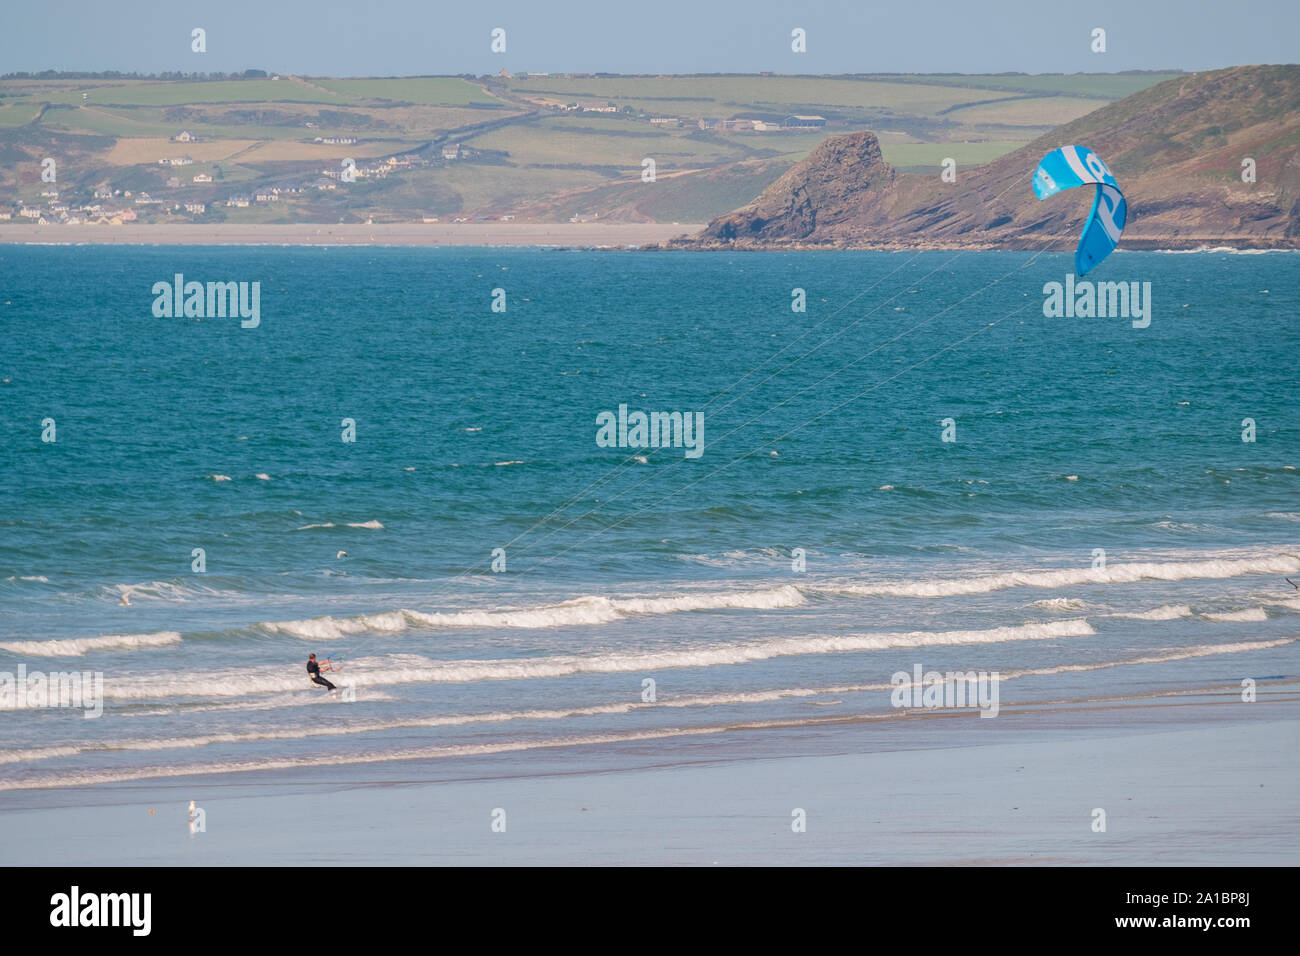 A man kite surfing on the sea at Little Haven, on the coast of St Bride's Bay, Pembrokeshire National Park, South West Wales UK Stock Photo